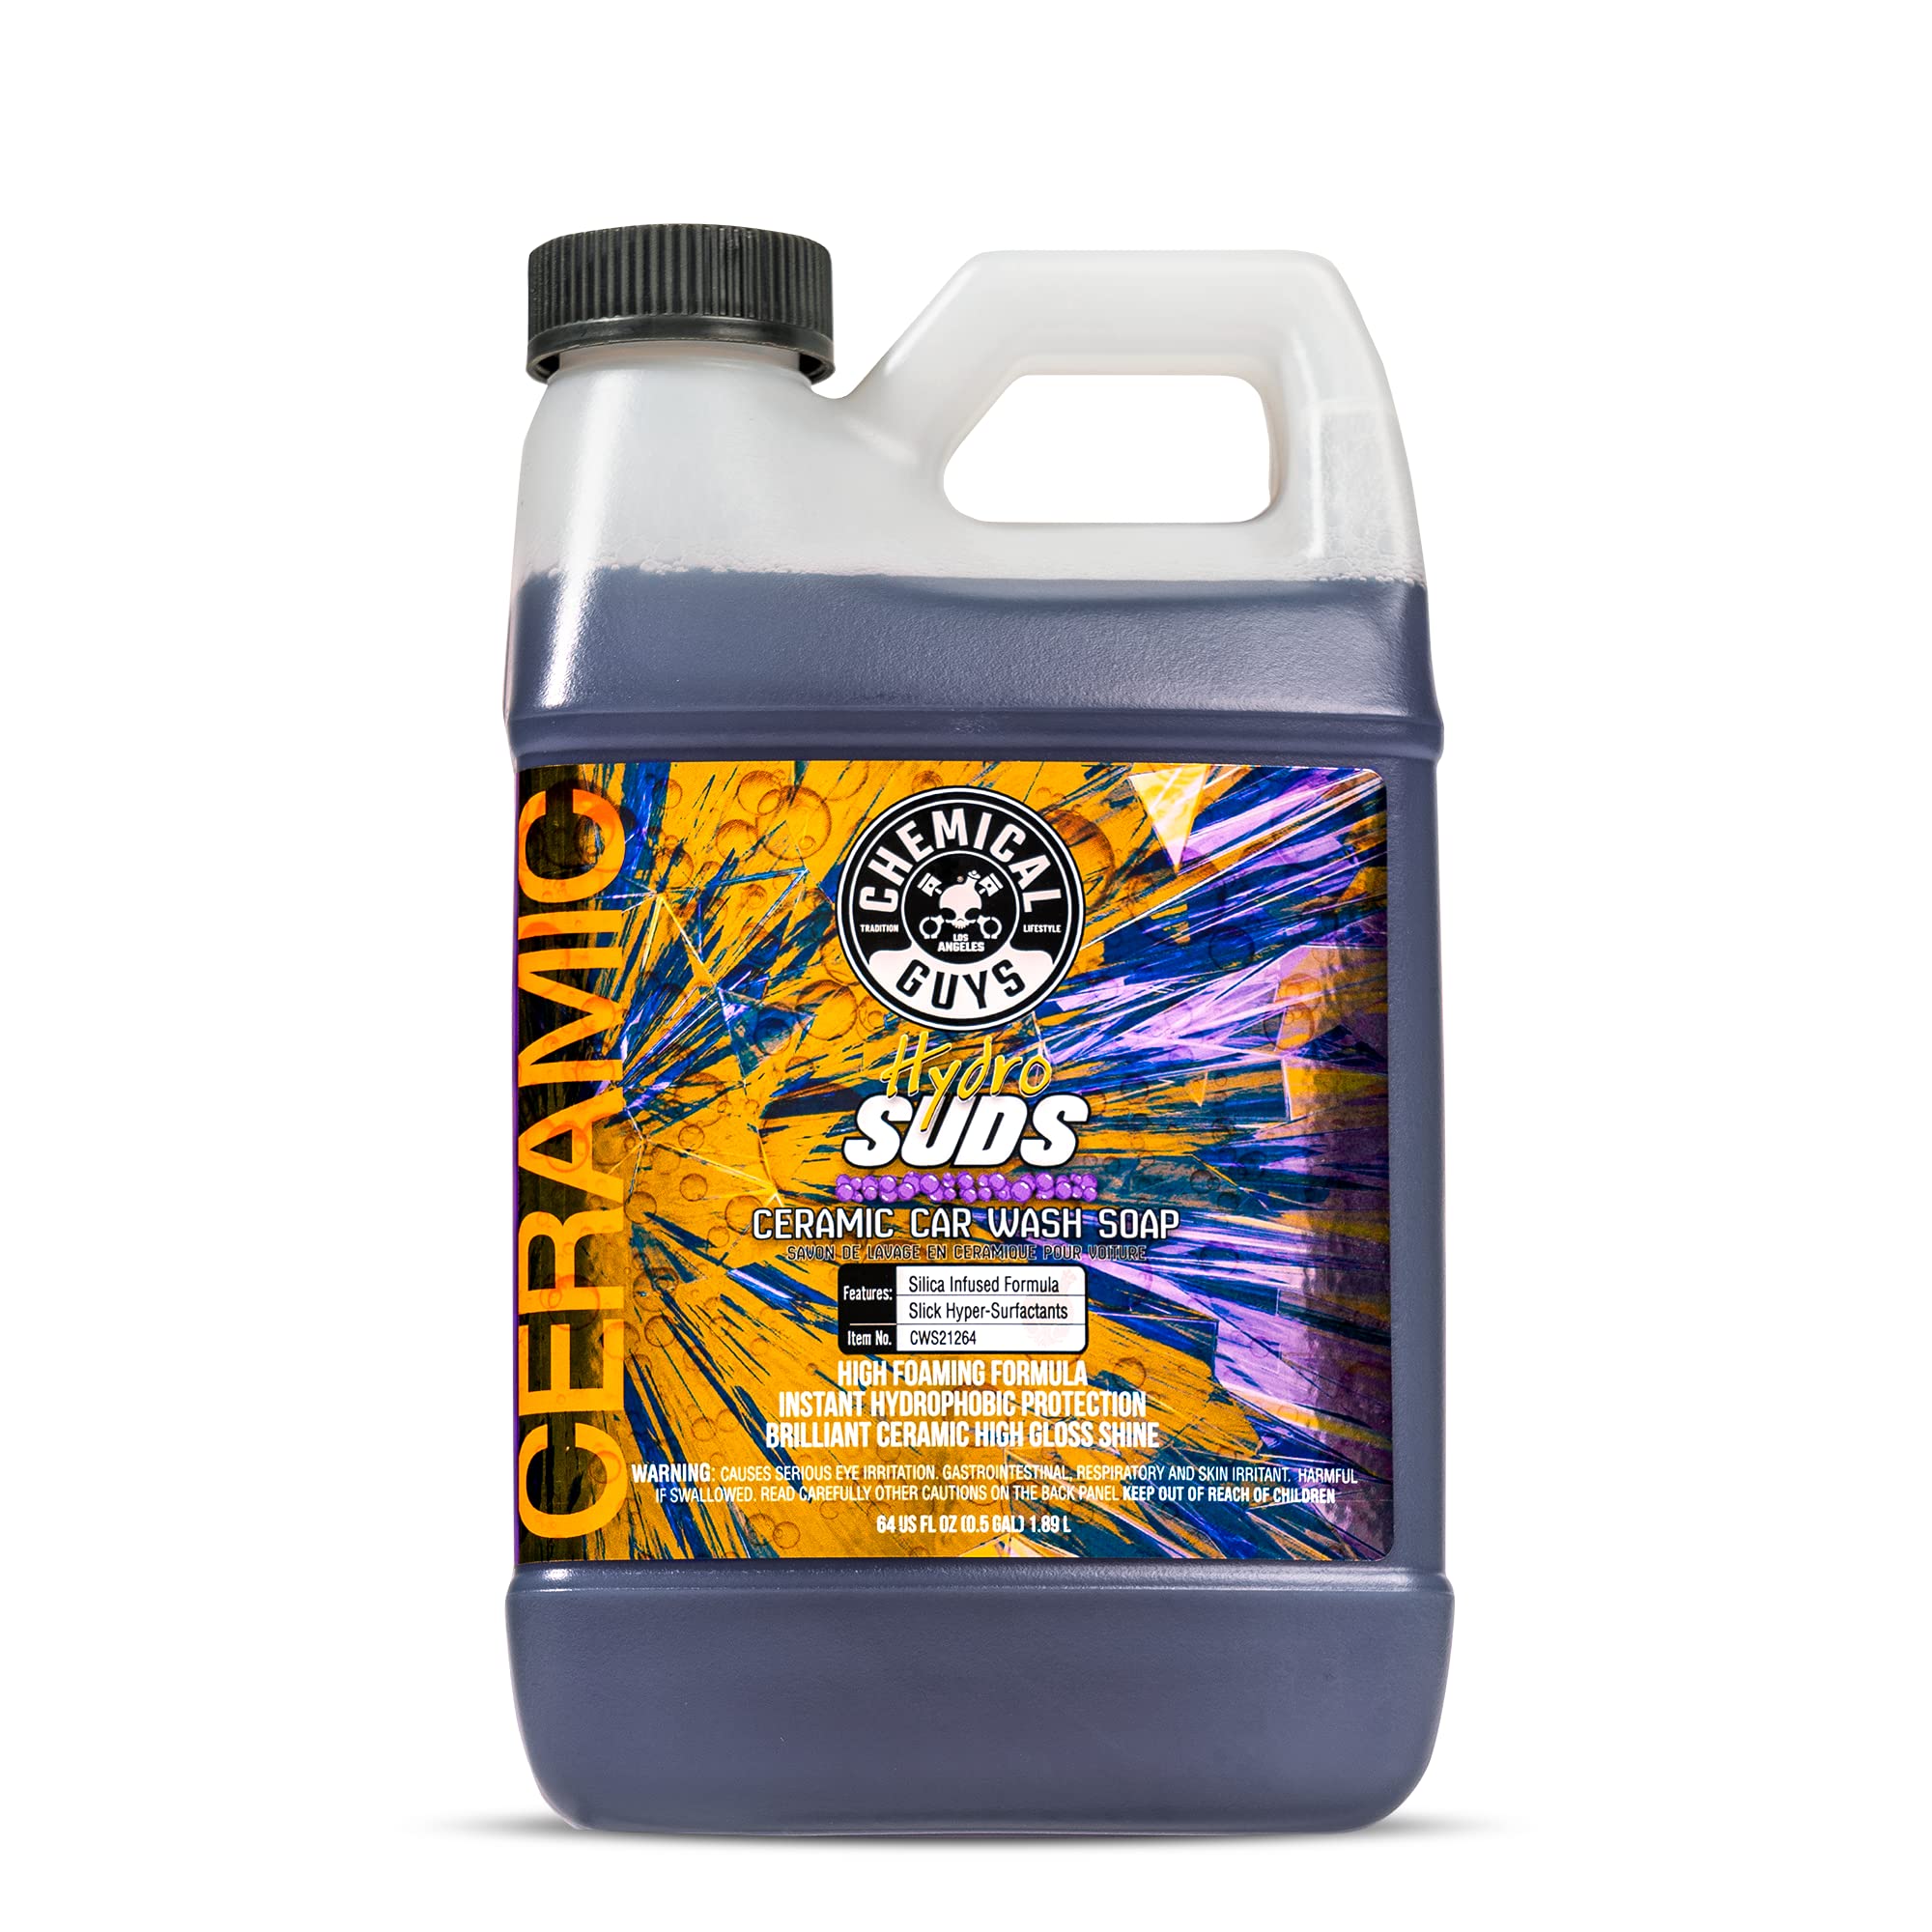 Chemical Guys CWS21264 HydroSuds Ceramic SiO2 Shine High Foaming Car Wash  Soap (Works with Foam Cannons, Foam Guns or Bucket Washes) for Cars,  Trucks, Motorcycles, RVs & More, 64 fl oz, Berry